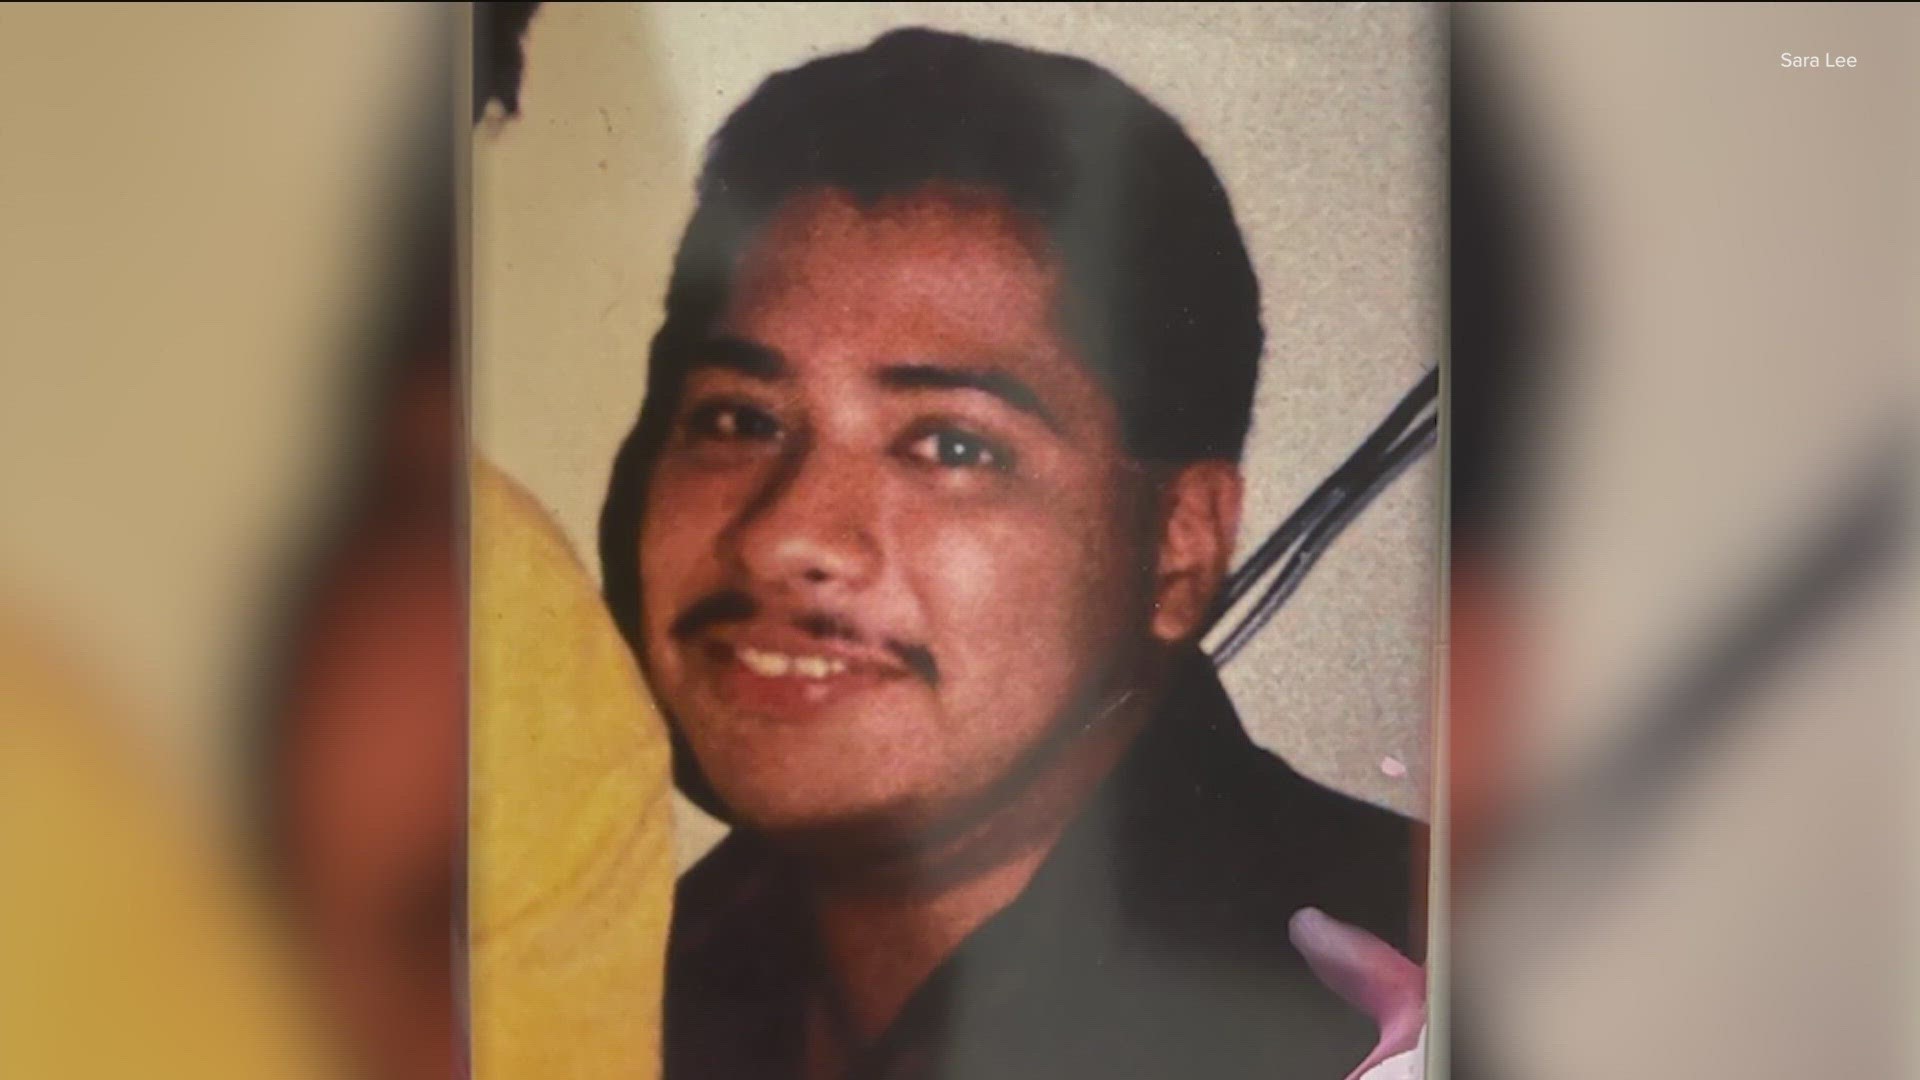 Twenty-eight years after Stephen Arevalo was found death, it's still not clear exactly what happened to him.